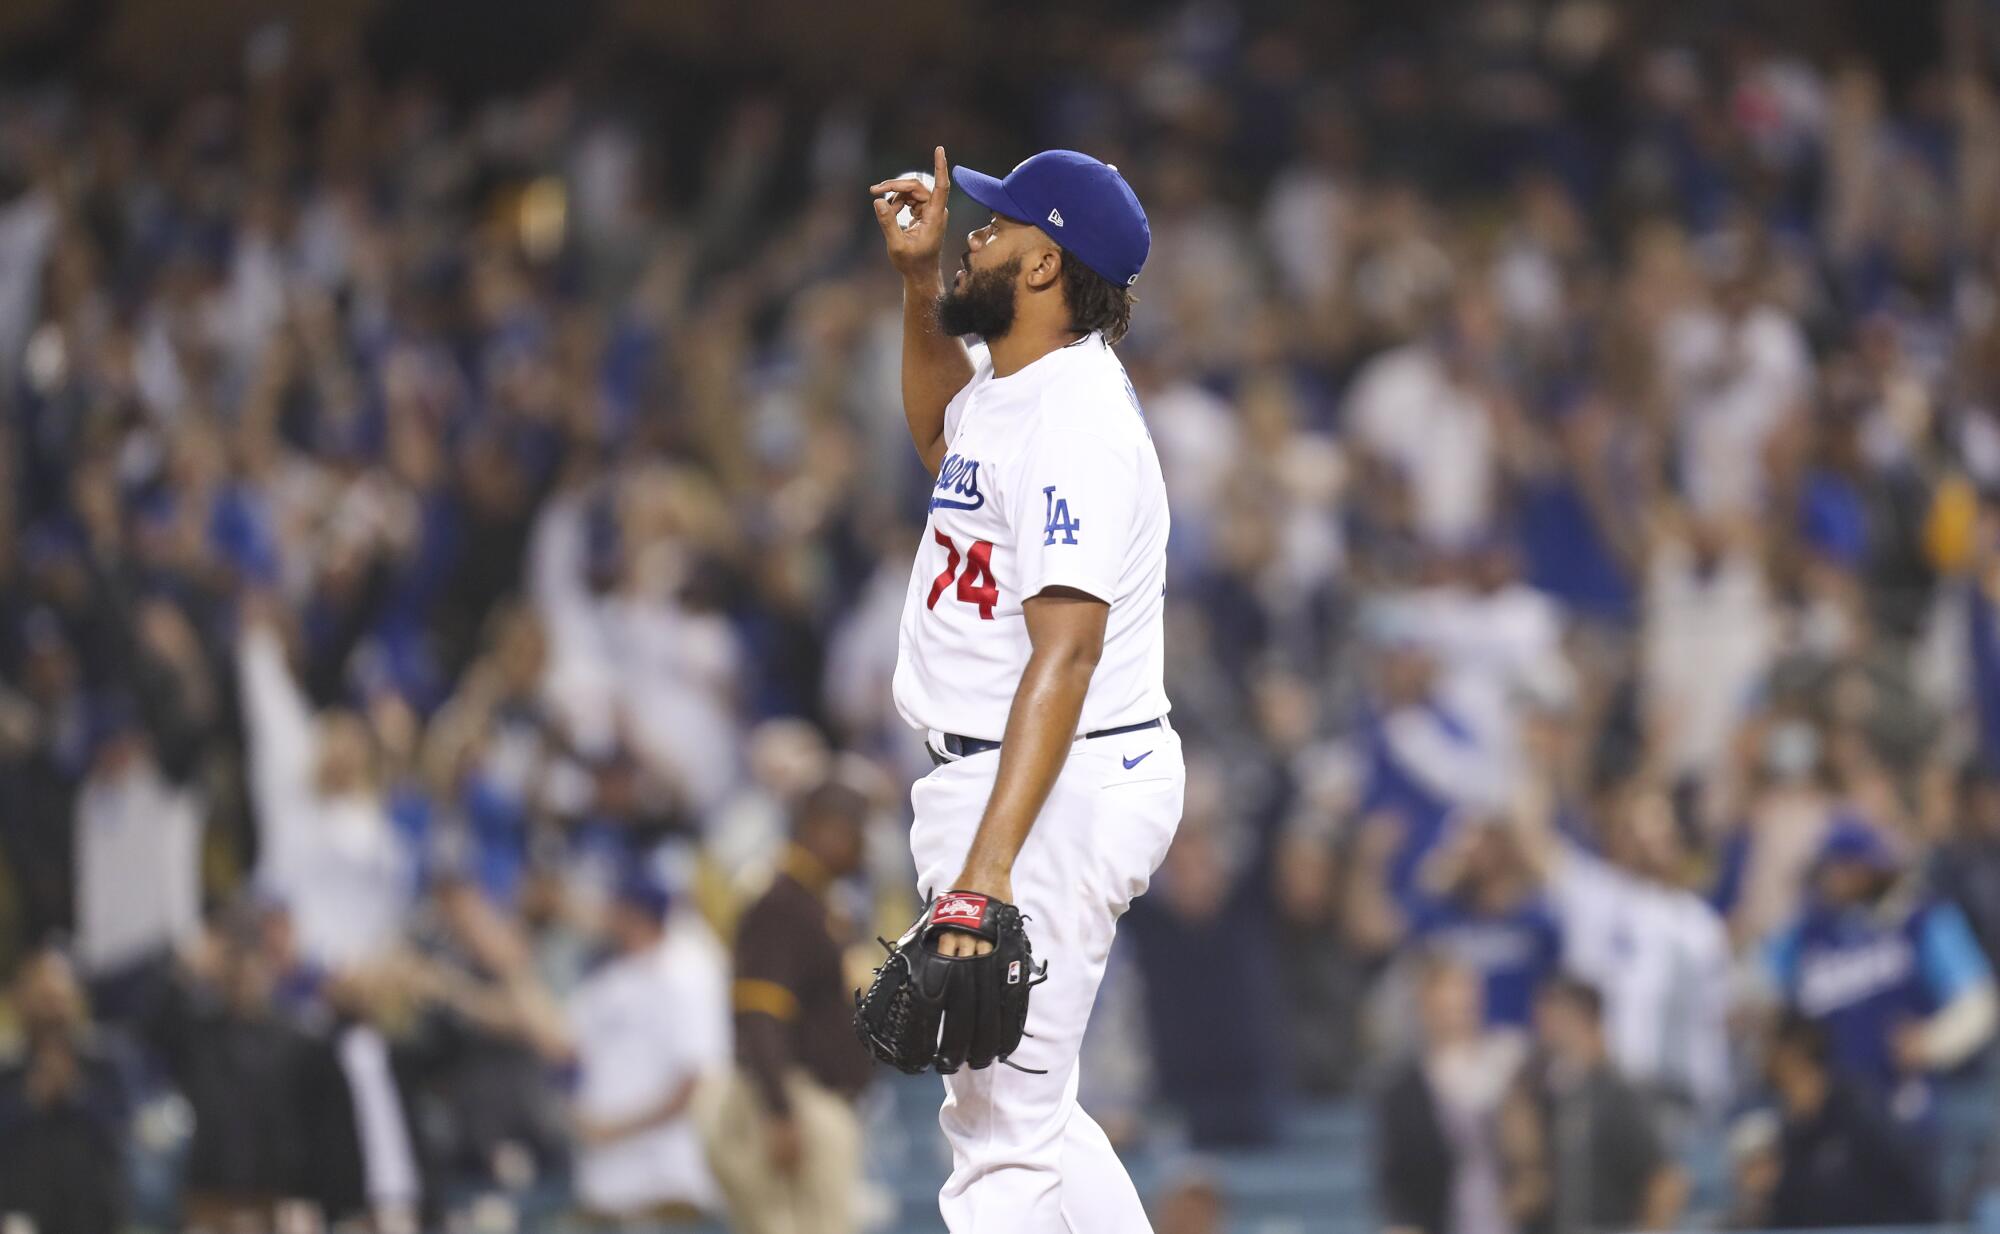 Dodgers closer pitcher Kenley Jansen points a finger in the air after getting the final out against the San Diego Padres.